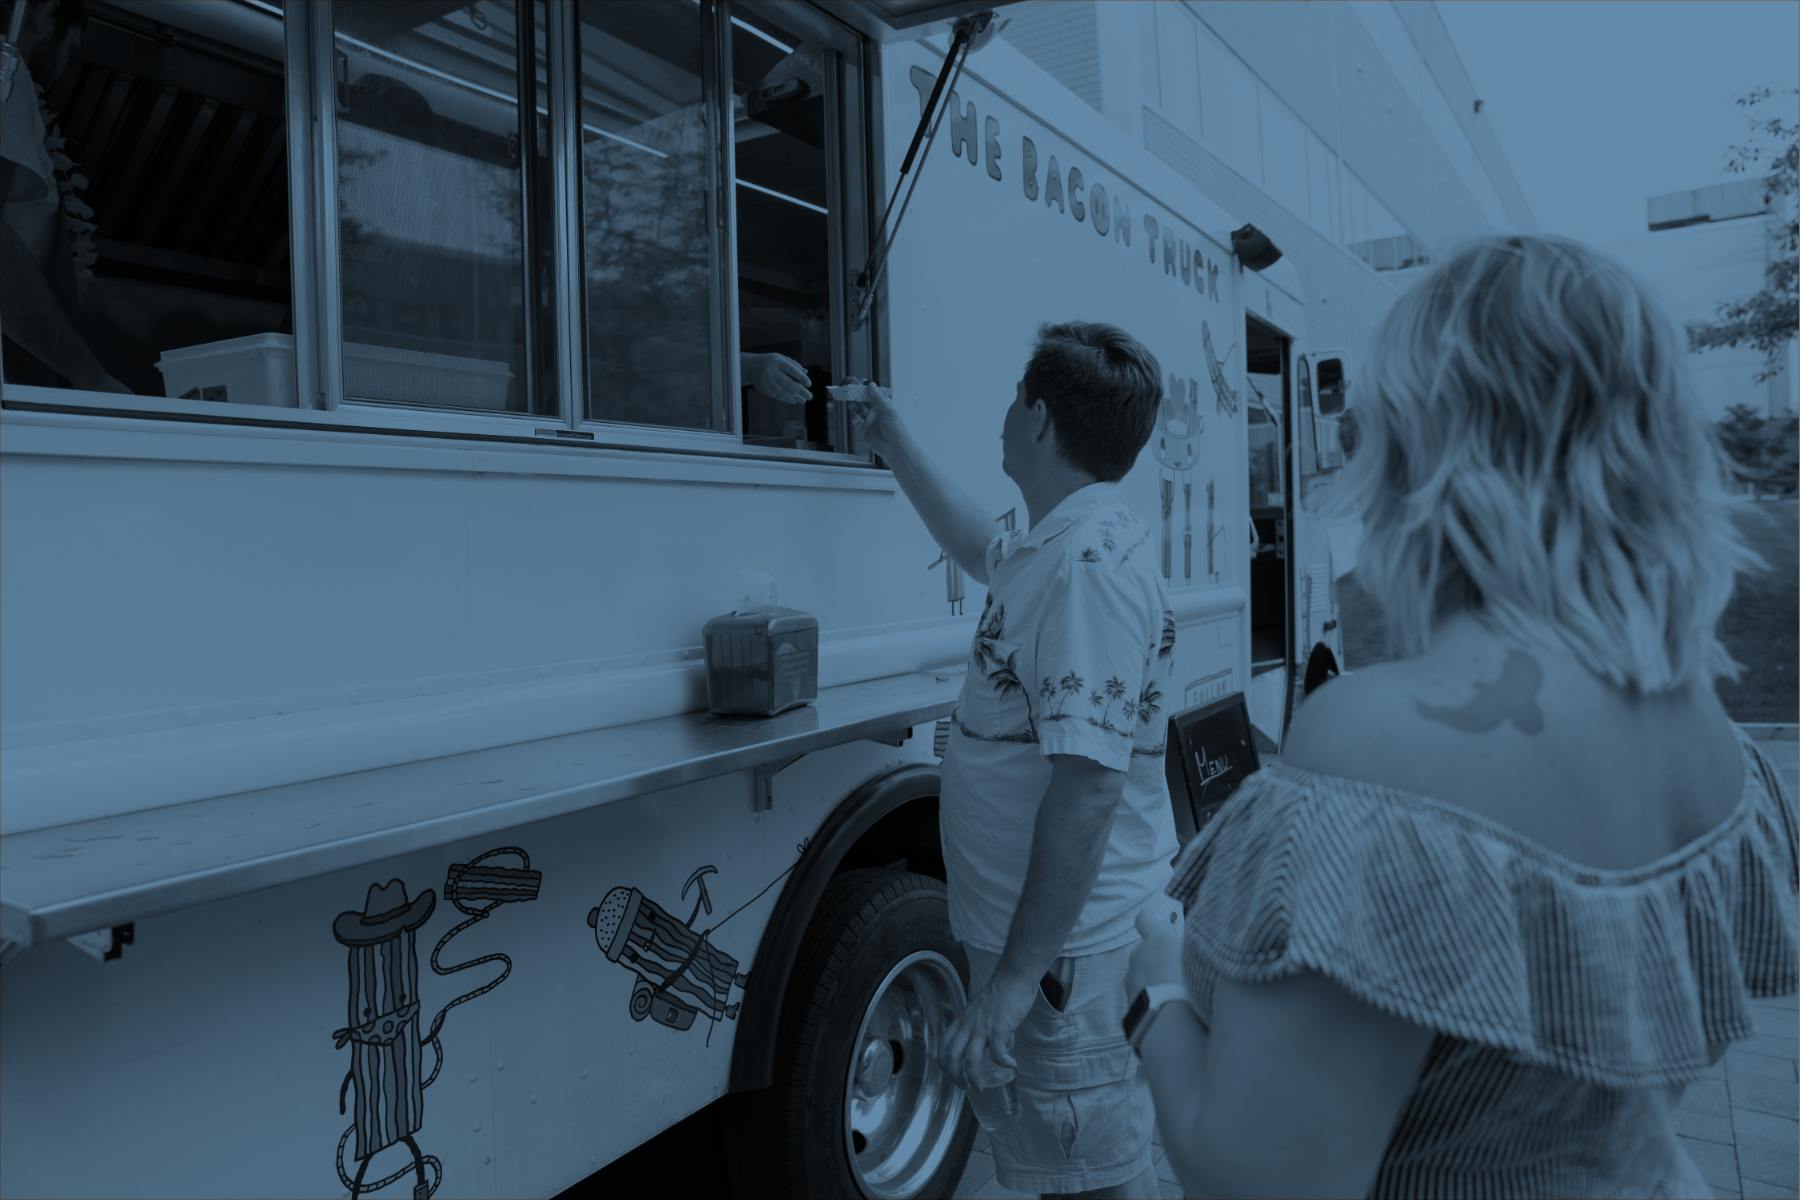 Image of an employee being handed food from a food truck window